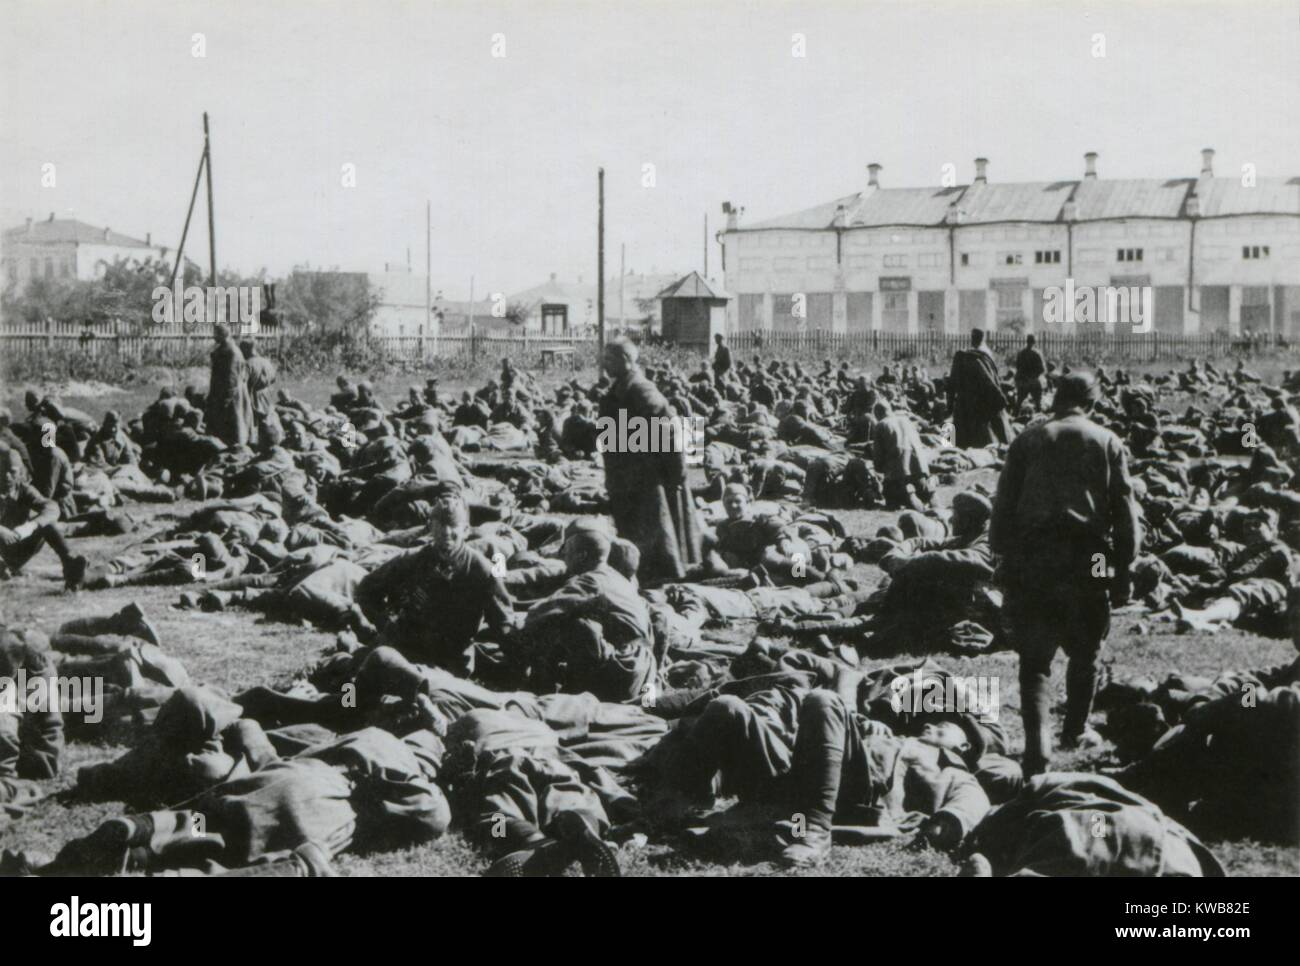 Soviet prisoners of War in a camp at Potschuz, USSR, captured during Operation Barbarossa, 1941. Over 3 million Soviet (Russian) soldiers were taken prisoner by Germans in 1941 with a large proportion killed by deliberate Nazi mistreatment. World War 2. (BSLOC 2014 8 21) Stock Photo